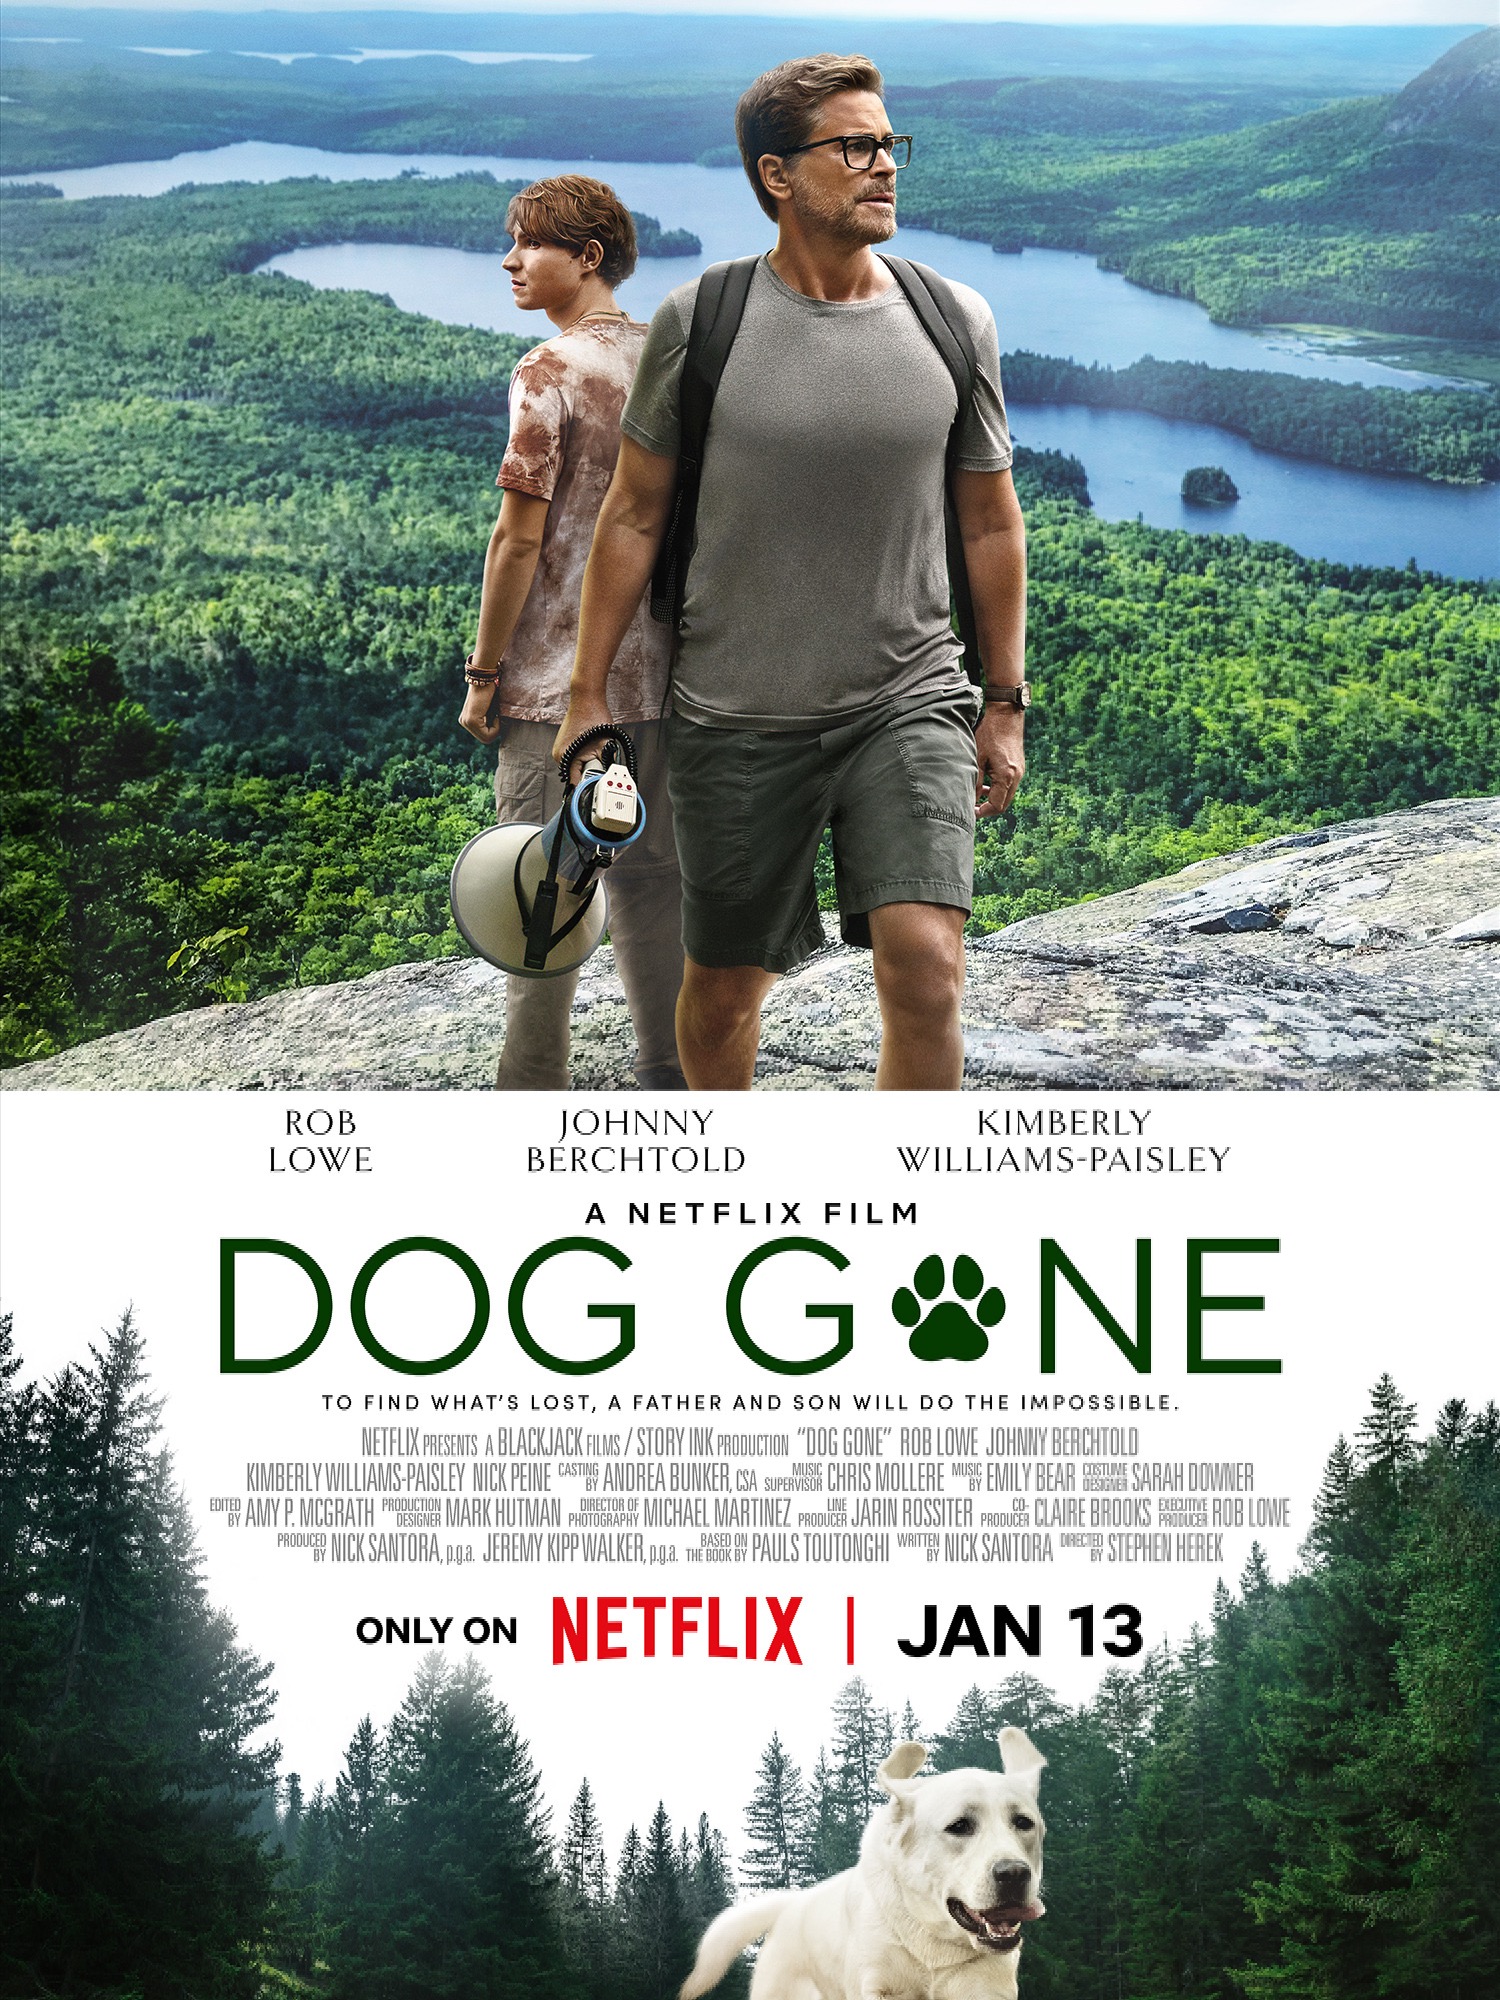 Dog Gone Movie Review And Summary